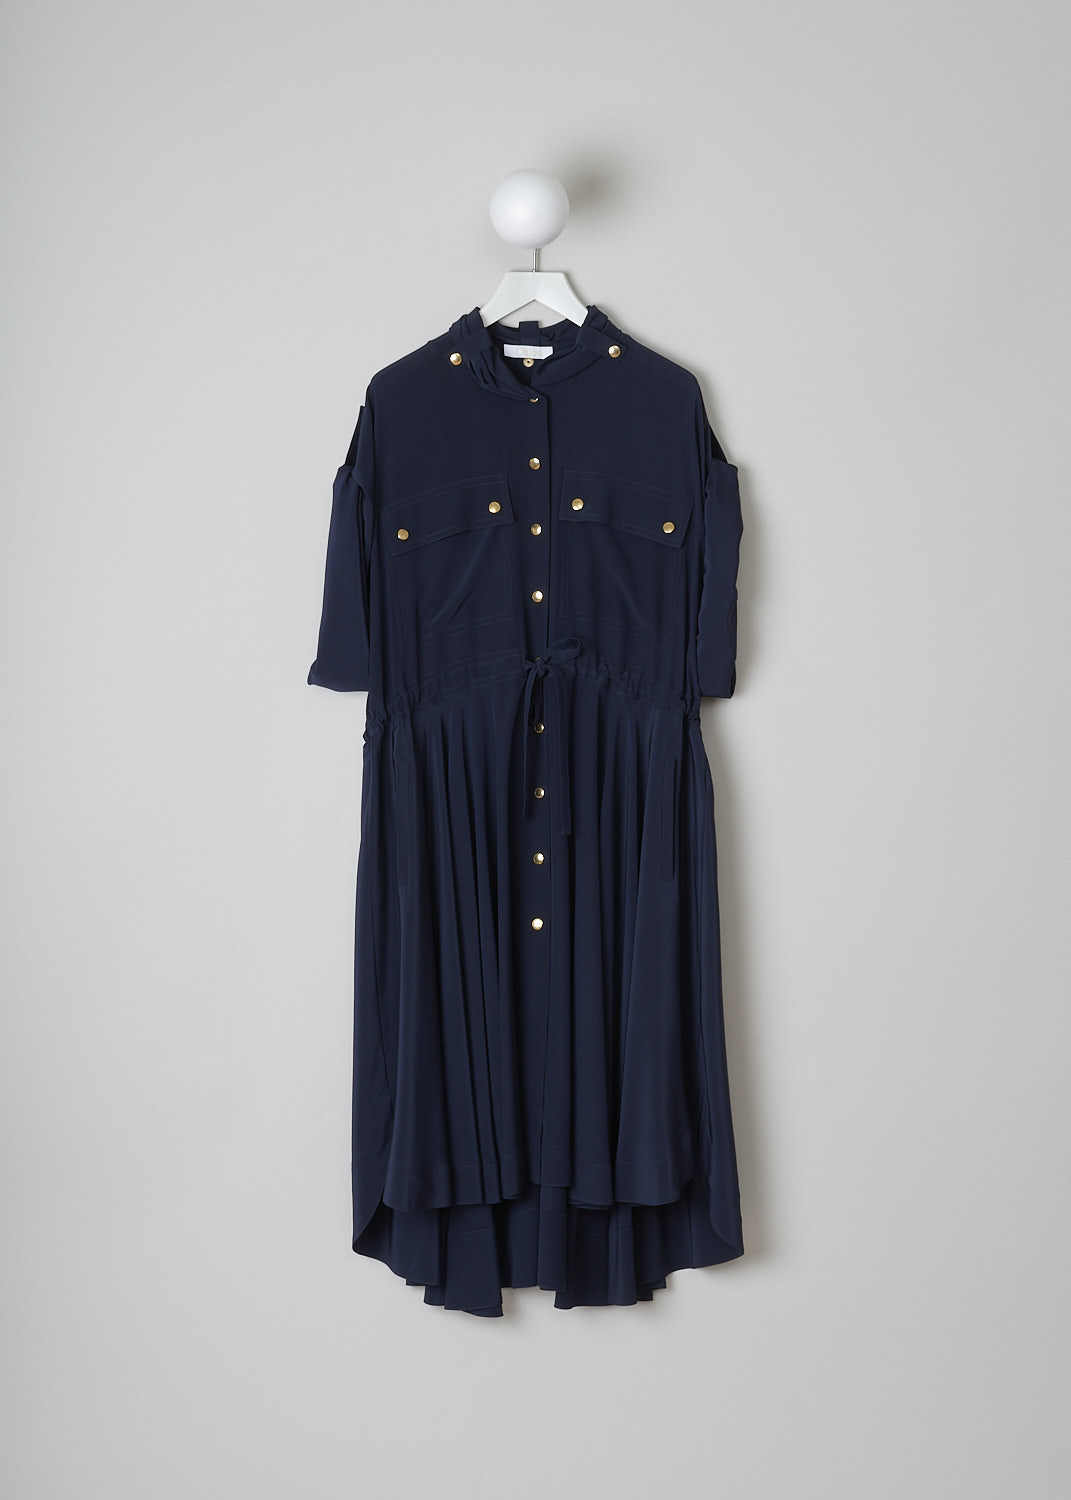 CHLOÃ‰, INK NAVY DRESS WITH GOLD-TONE BUTTONS, CHC19SRO510044C3_INK_NAVY, Blue, Front, This Ink navy silk maxi dress has gold-tone snap buttons throughout. The dress has a gathered collar with snap buttons and a front snap button closure. The wide long sleeves can be rolled up with snap buttons. On the front, the dress has two buttoned patch pockets and slanted pockets. A drawstring can be used to cinch in the waist. The dress has an asymmetric hemline.    
